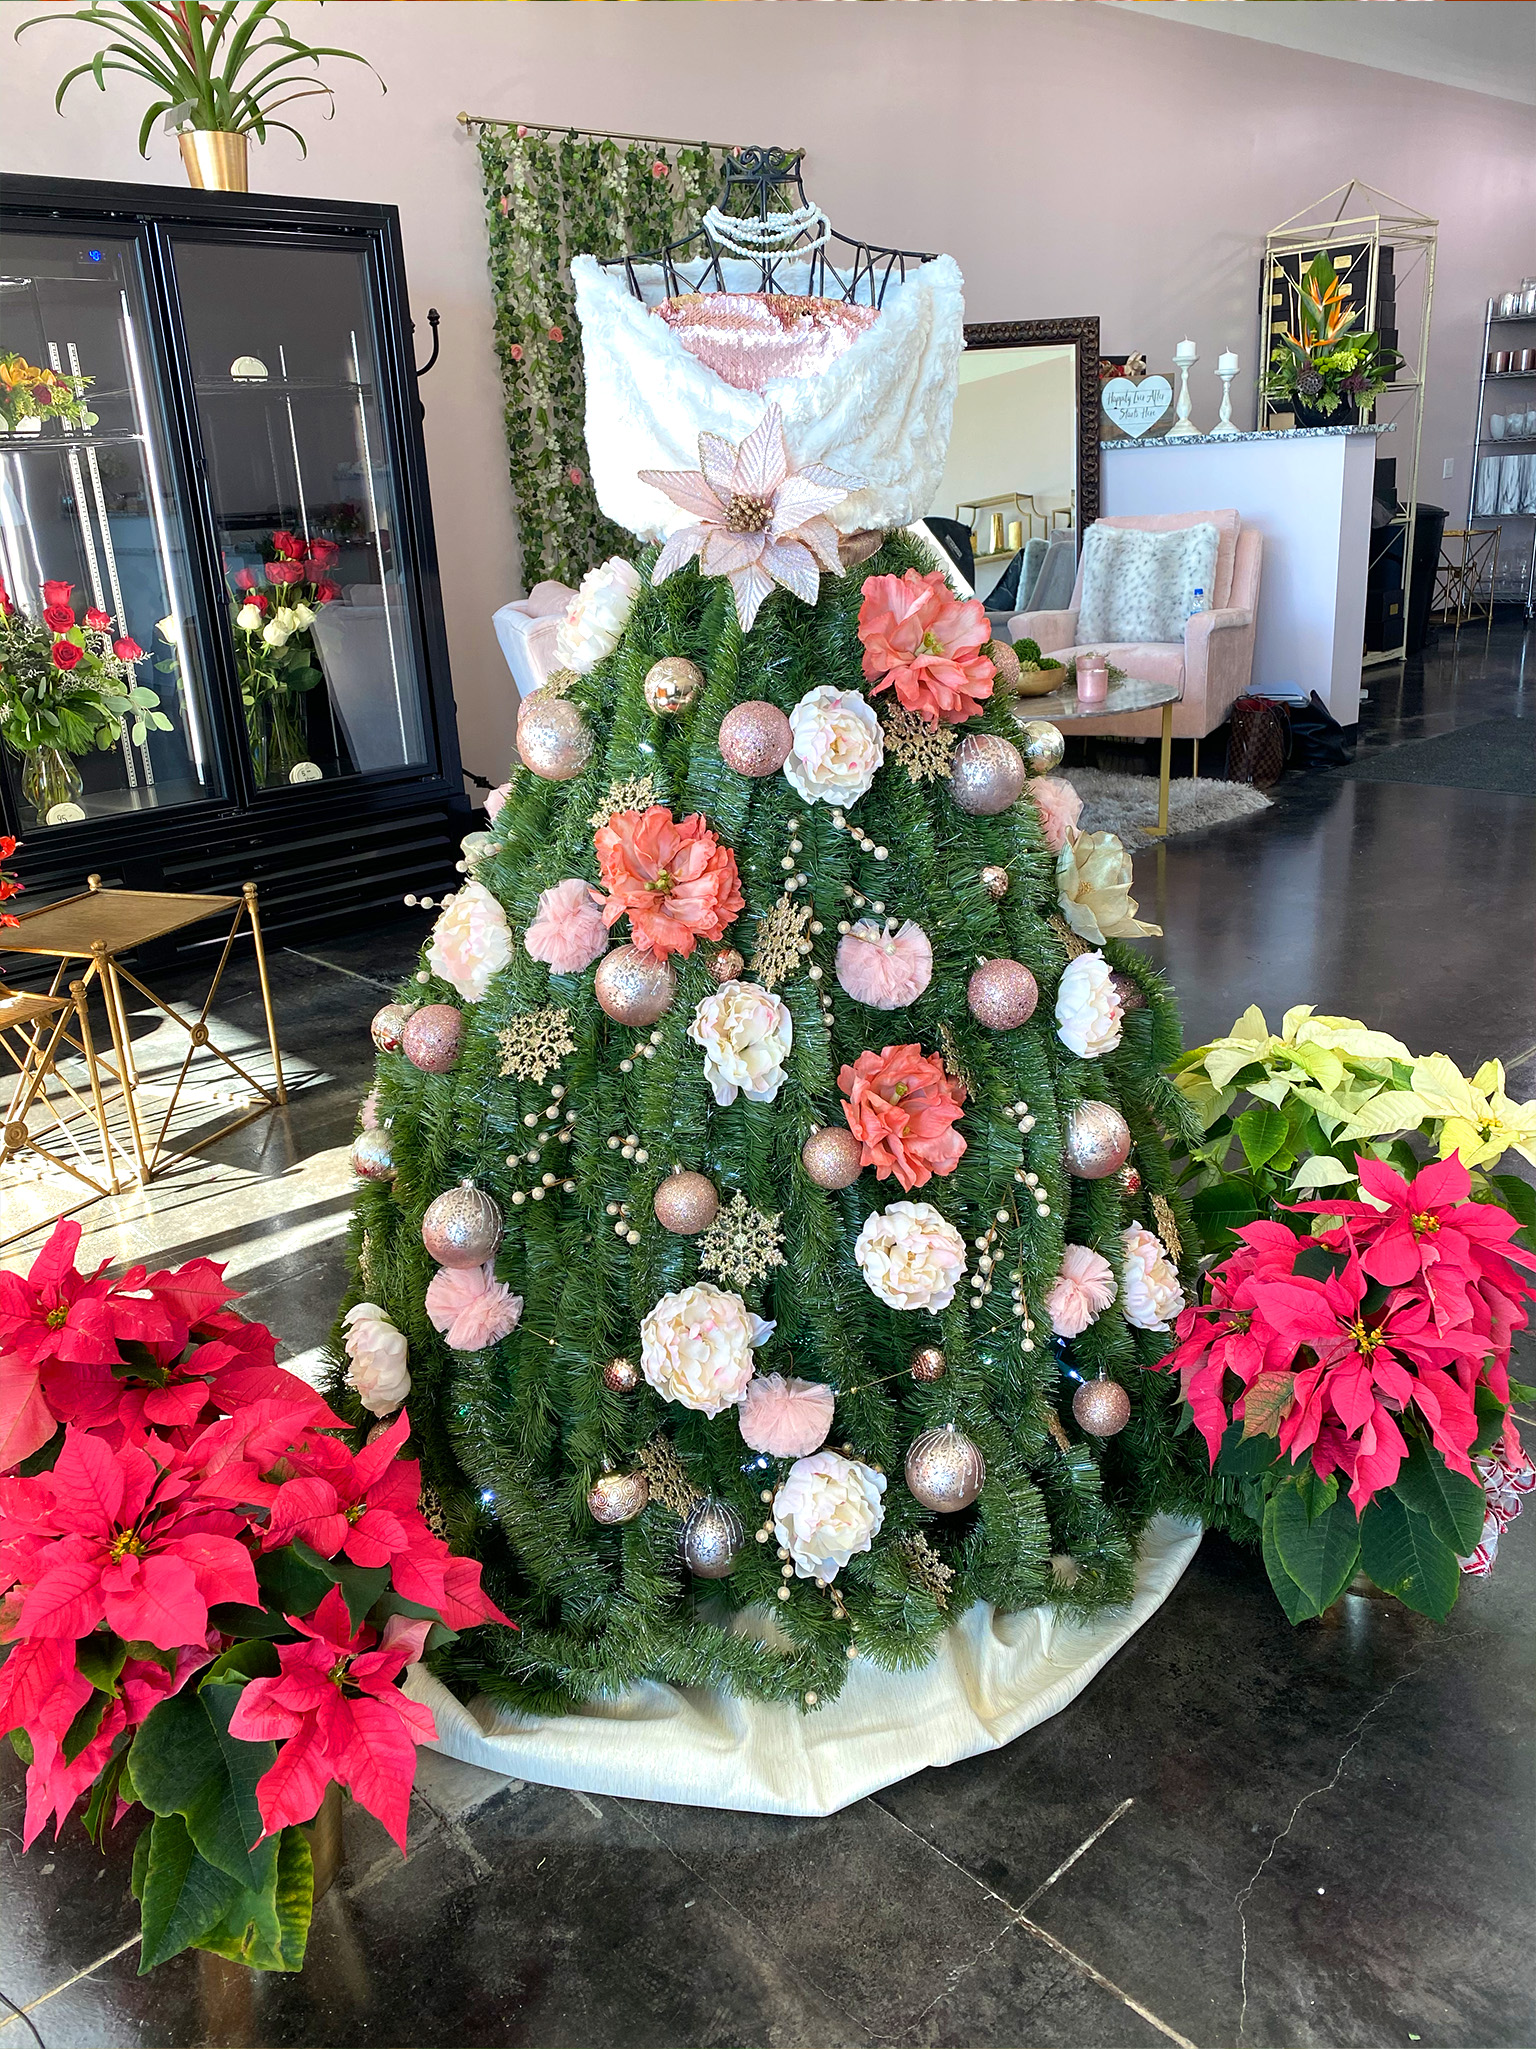 Favorite Christmas movies and flowers Frisco